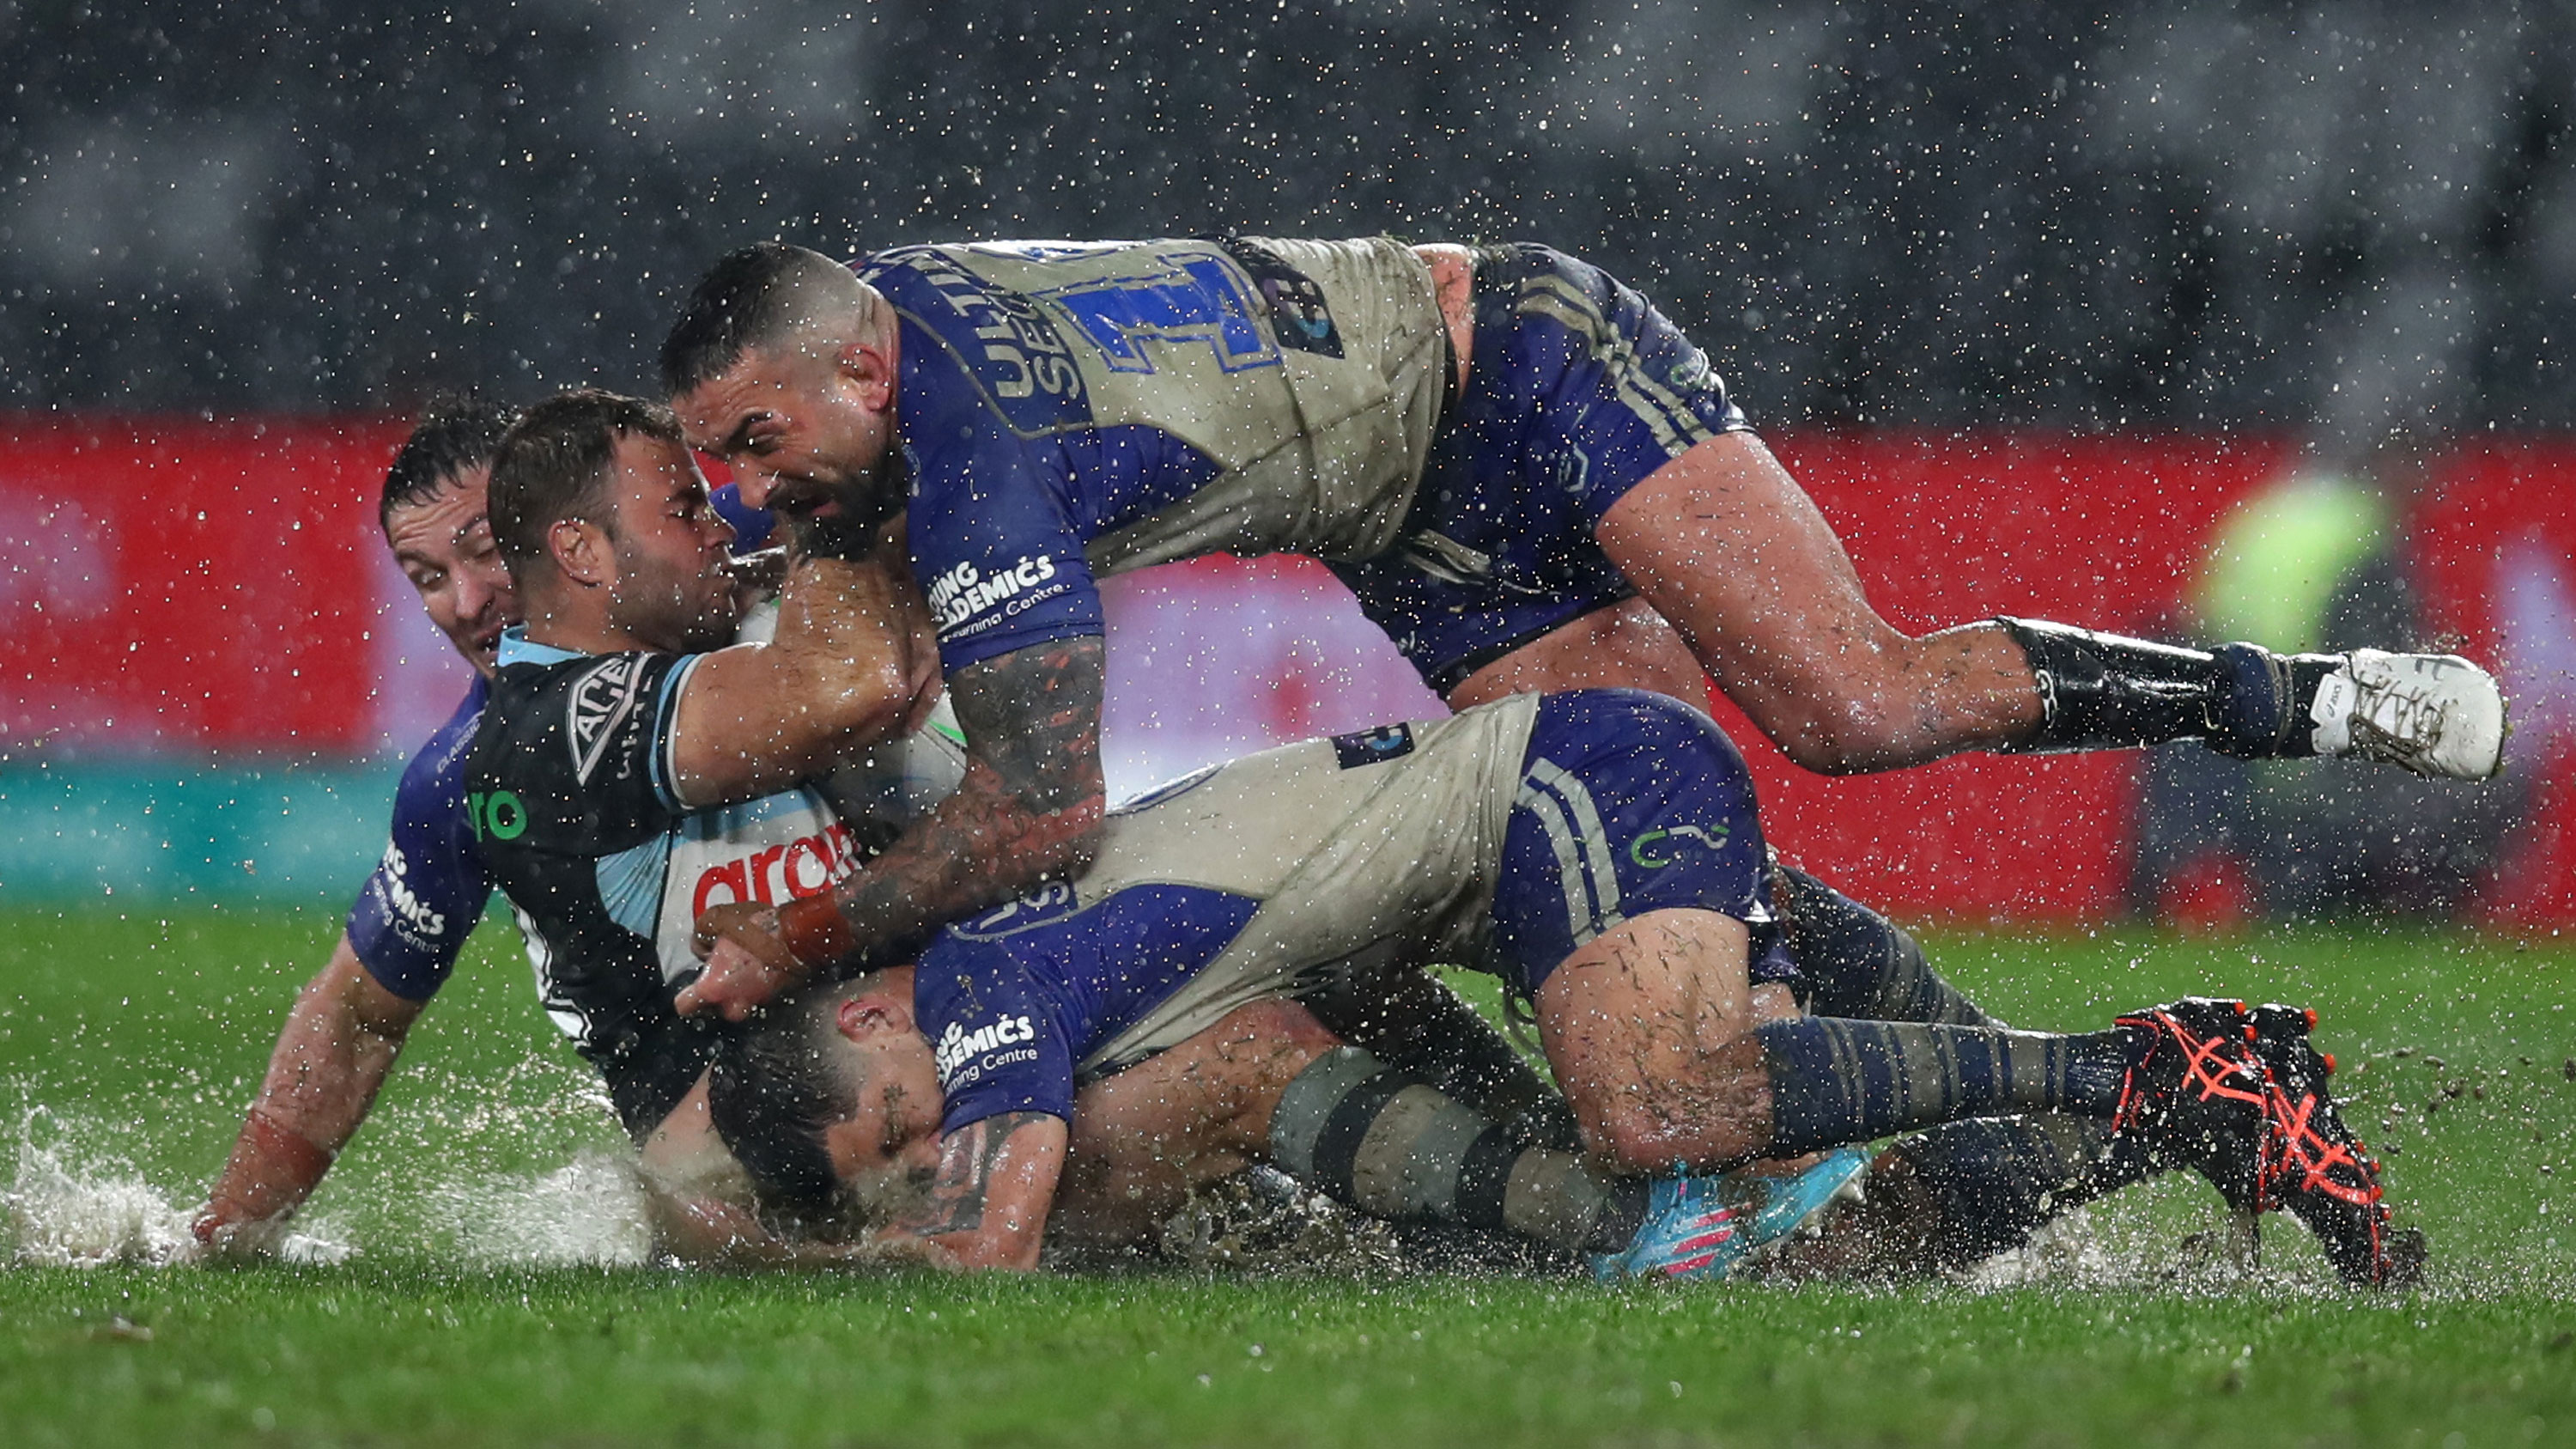 NRL News | Extreme response to wet weather football conditions, Billy Slater on Melbourne Storm